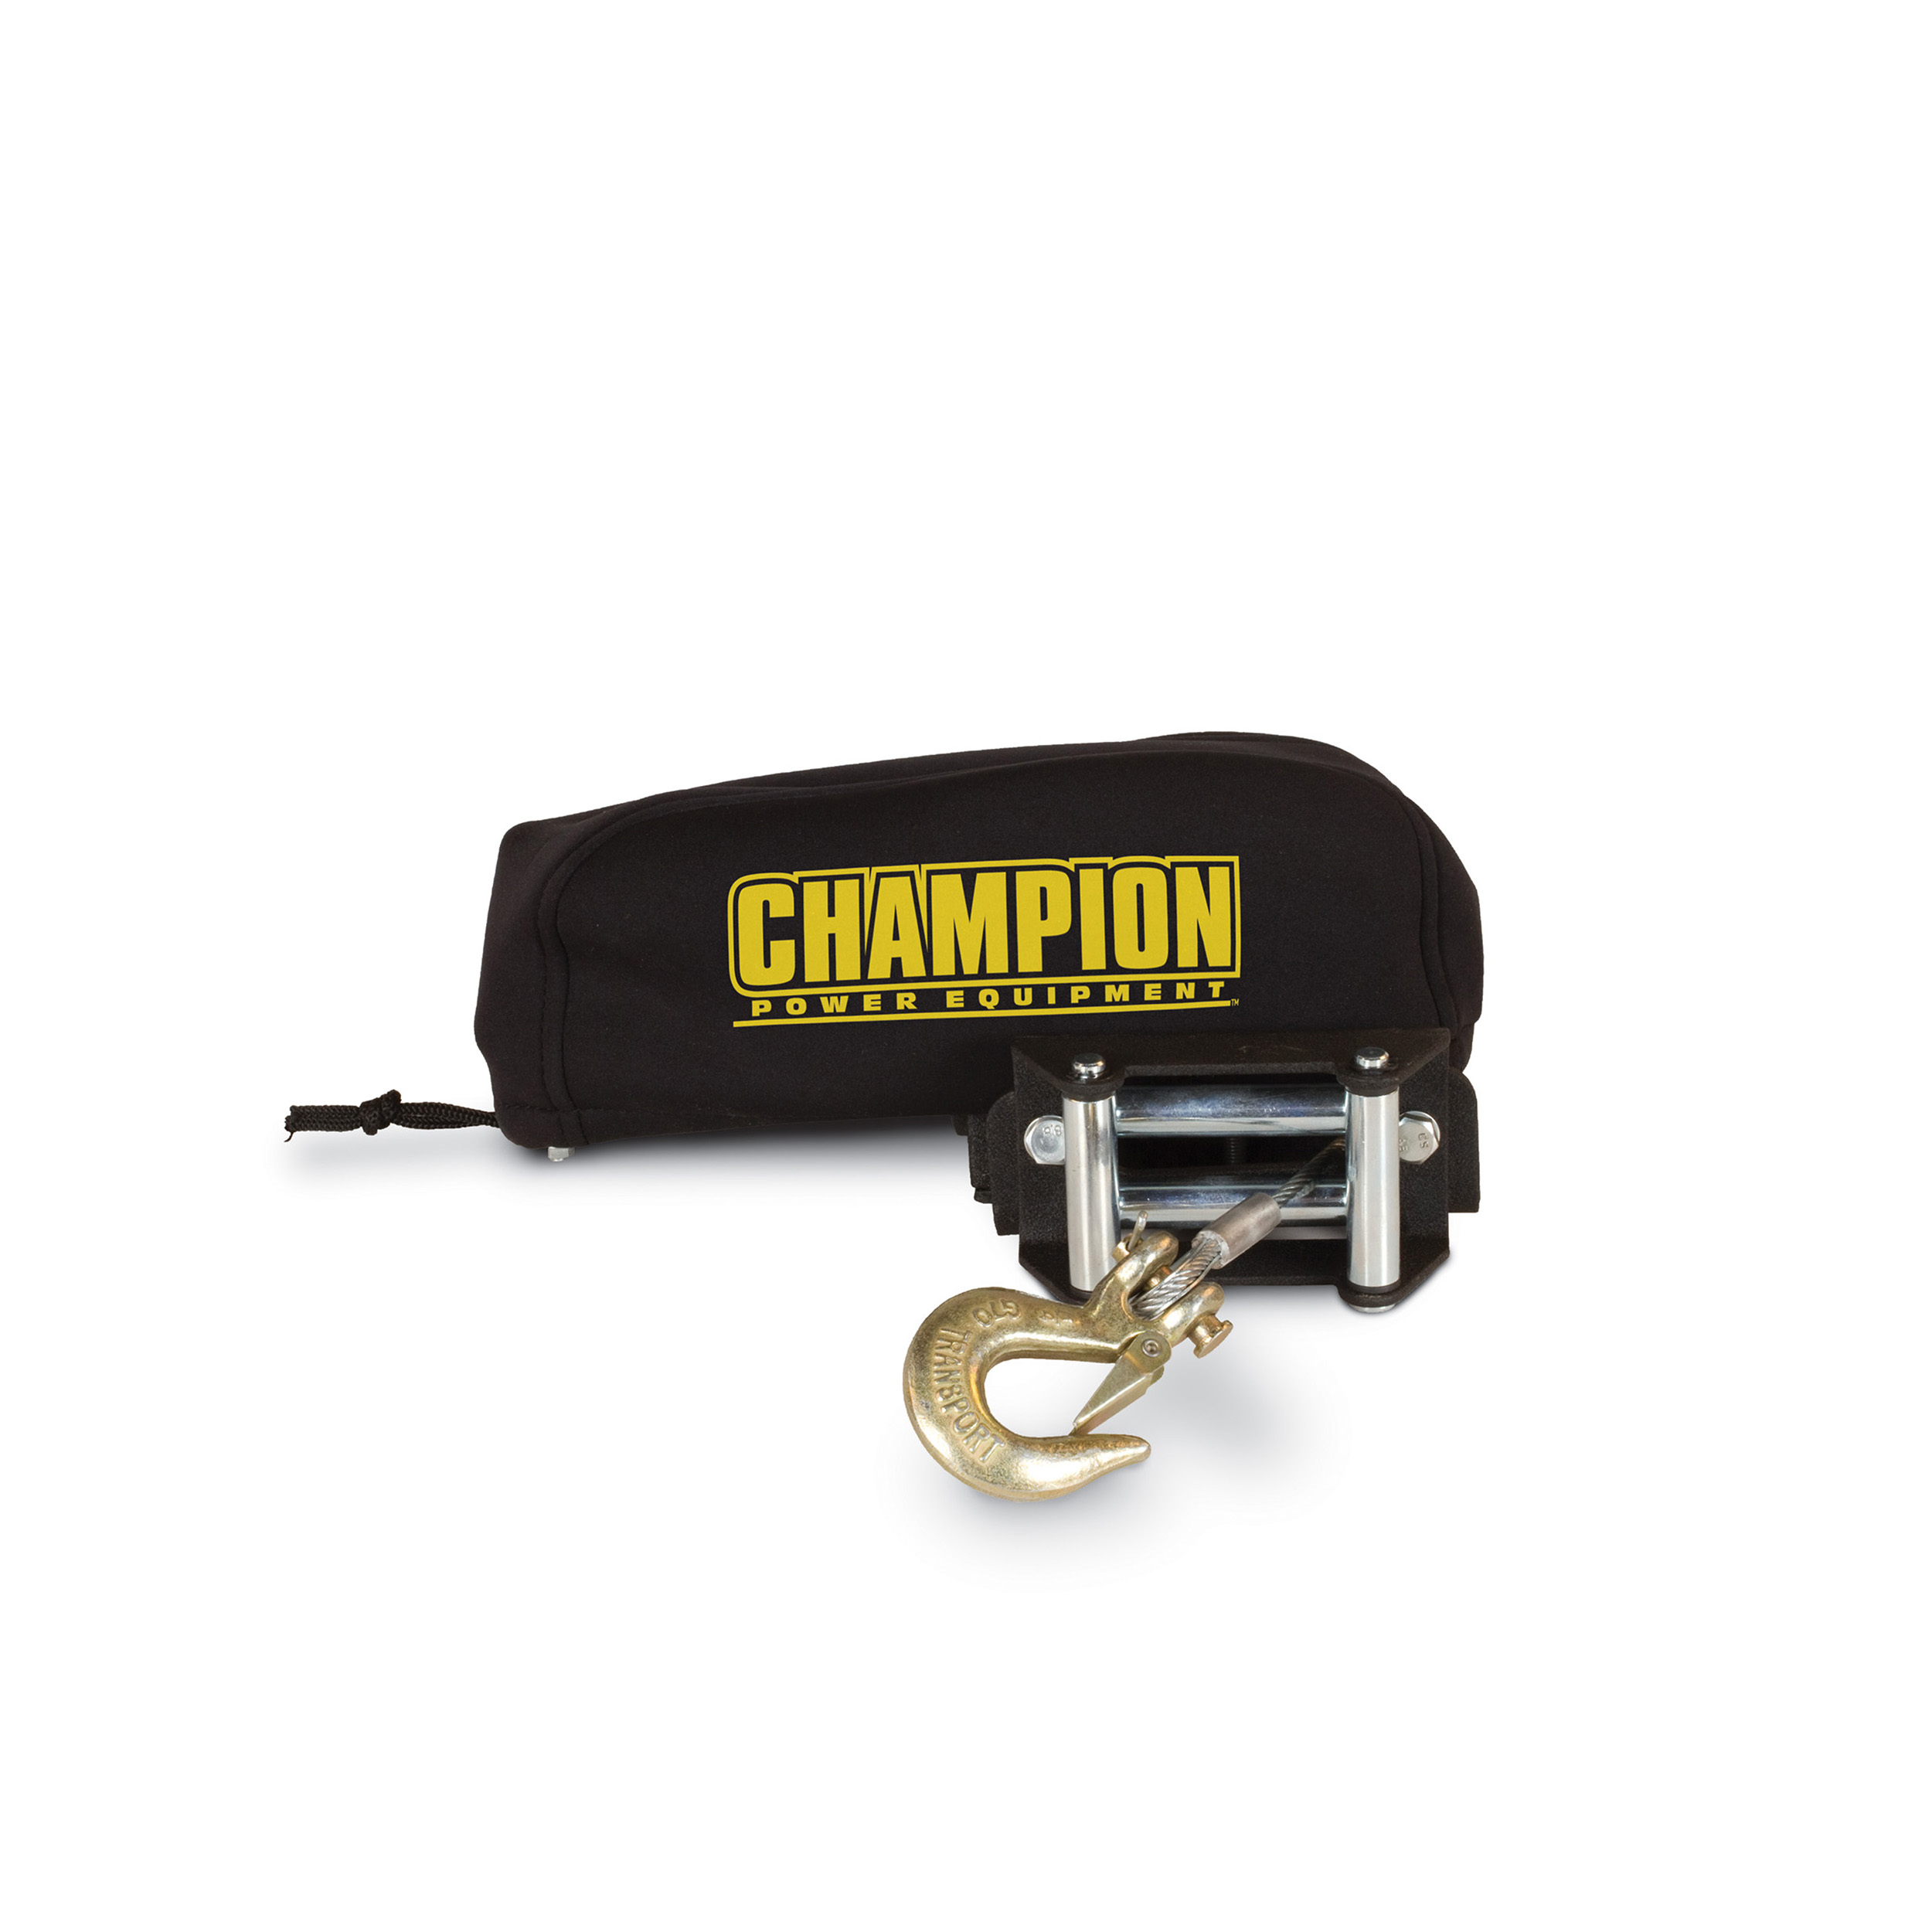 Champion Winch Cover For 2000 To 3000 Lb Winches